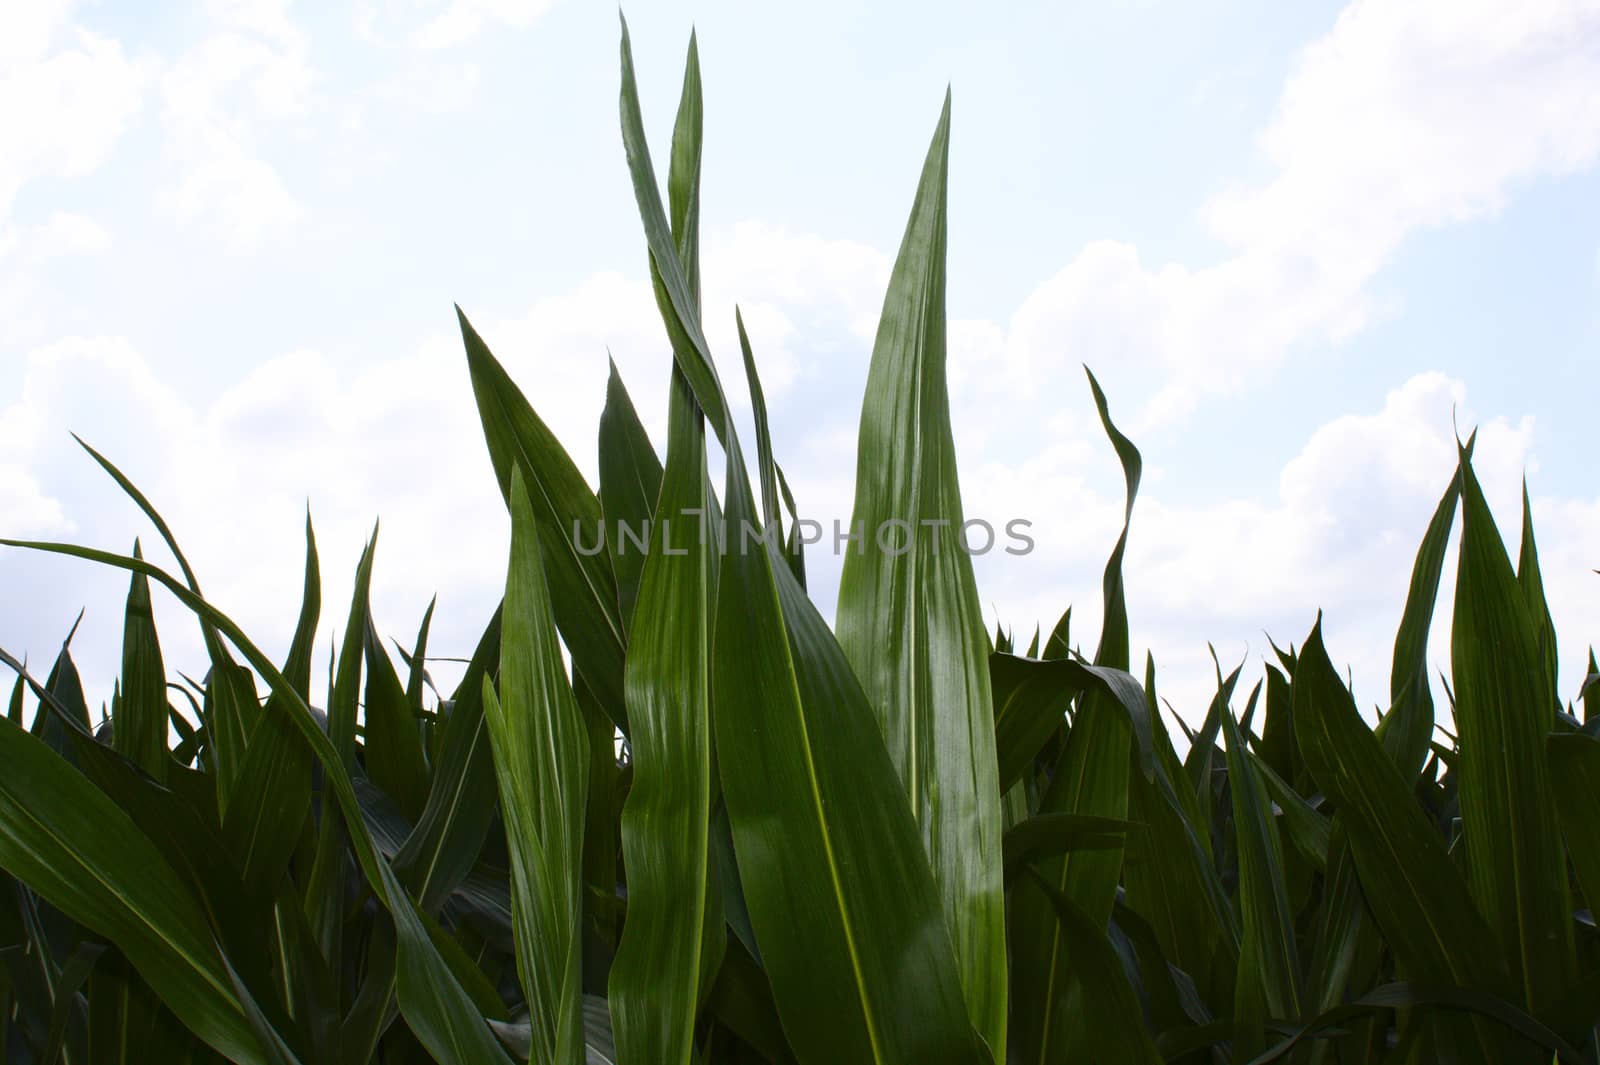 The picture shows corn field in the summer